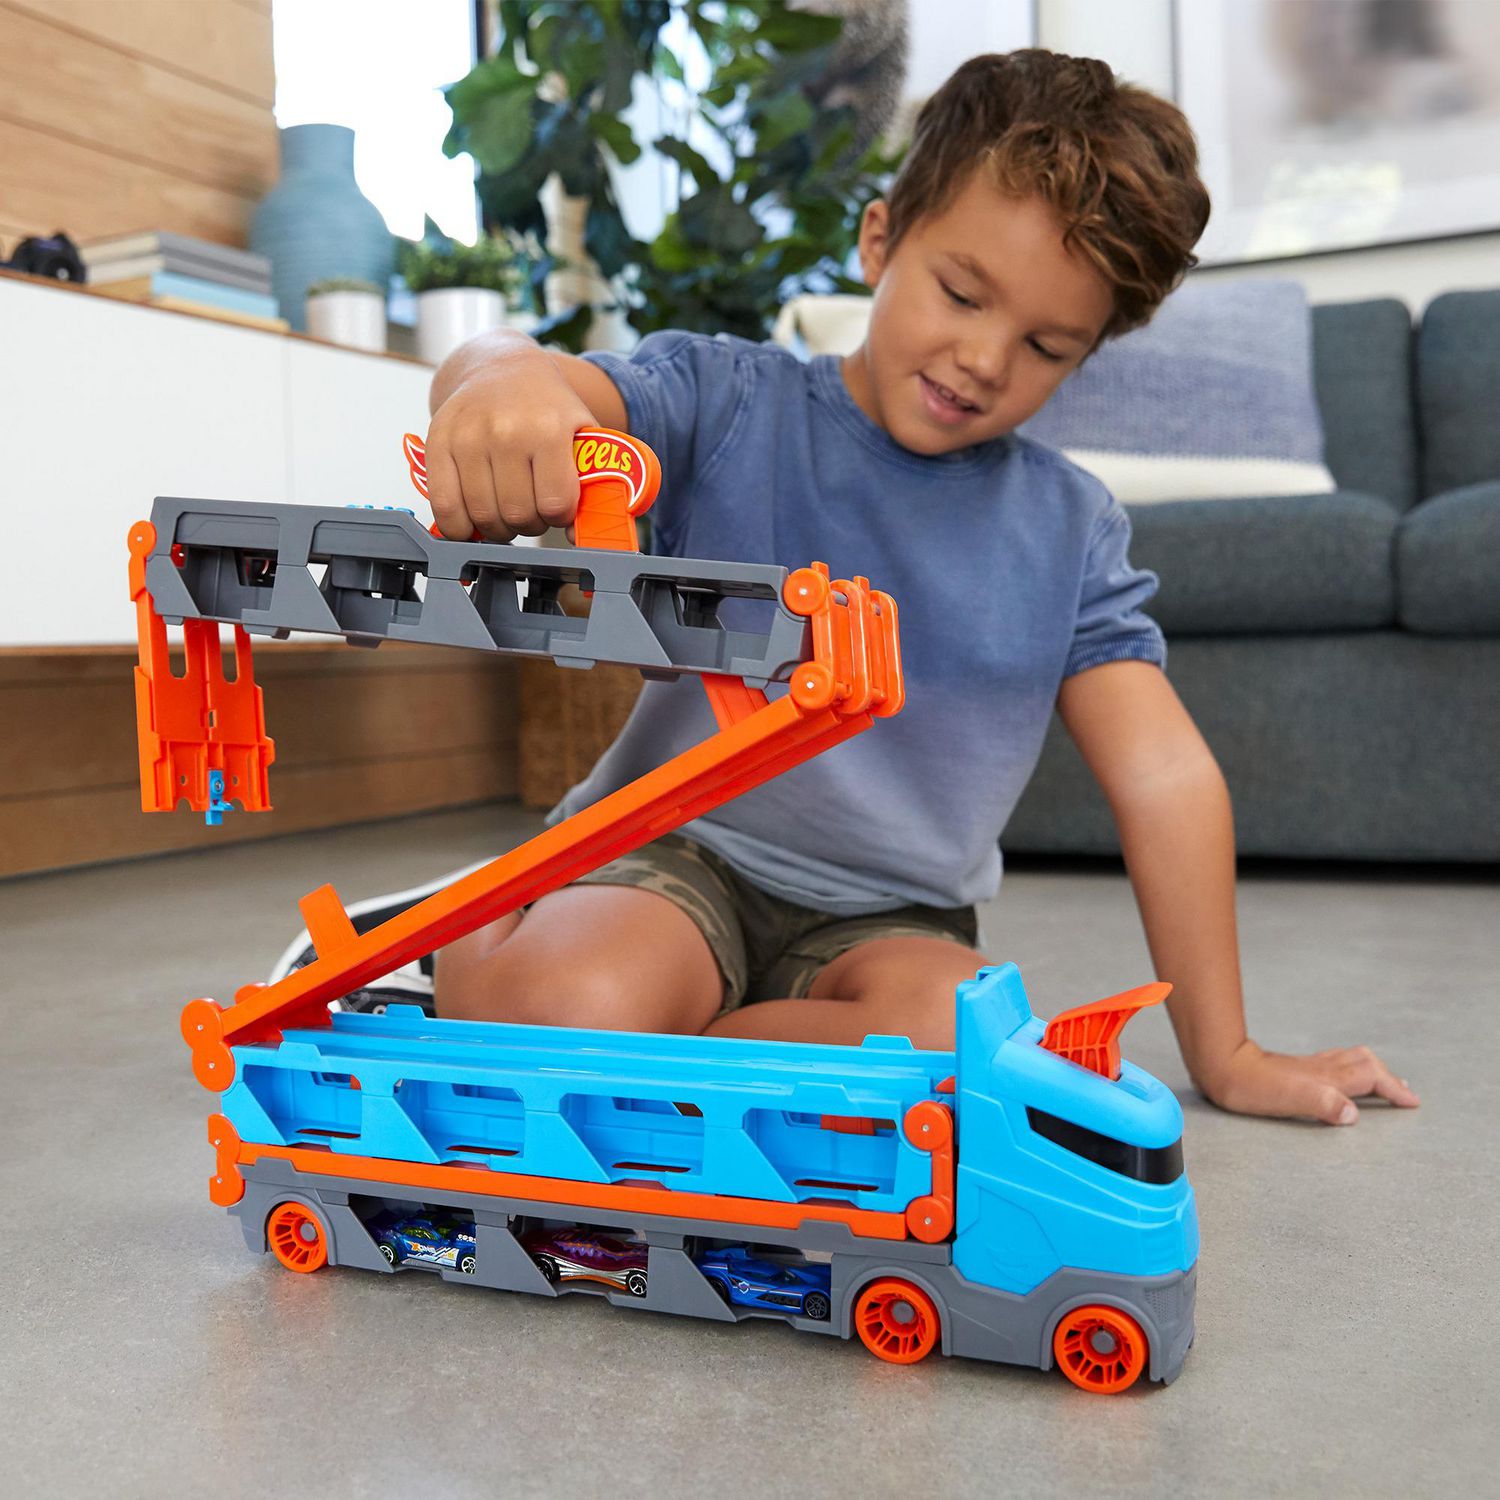 Hot Wheels Speedway Hauler Storage Carrier with 3 1:64 Scale Cars &  Convertible 6-Foot Drag Race Track for Kids 4 to 8 years Old, Stores 20+  Cars &